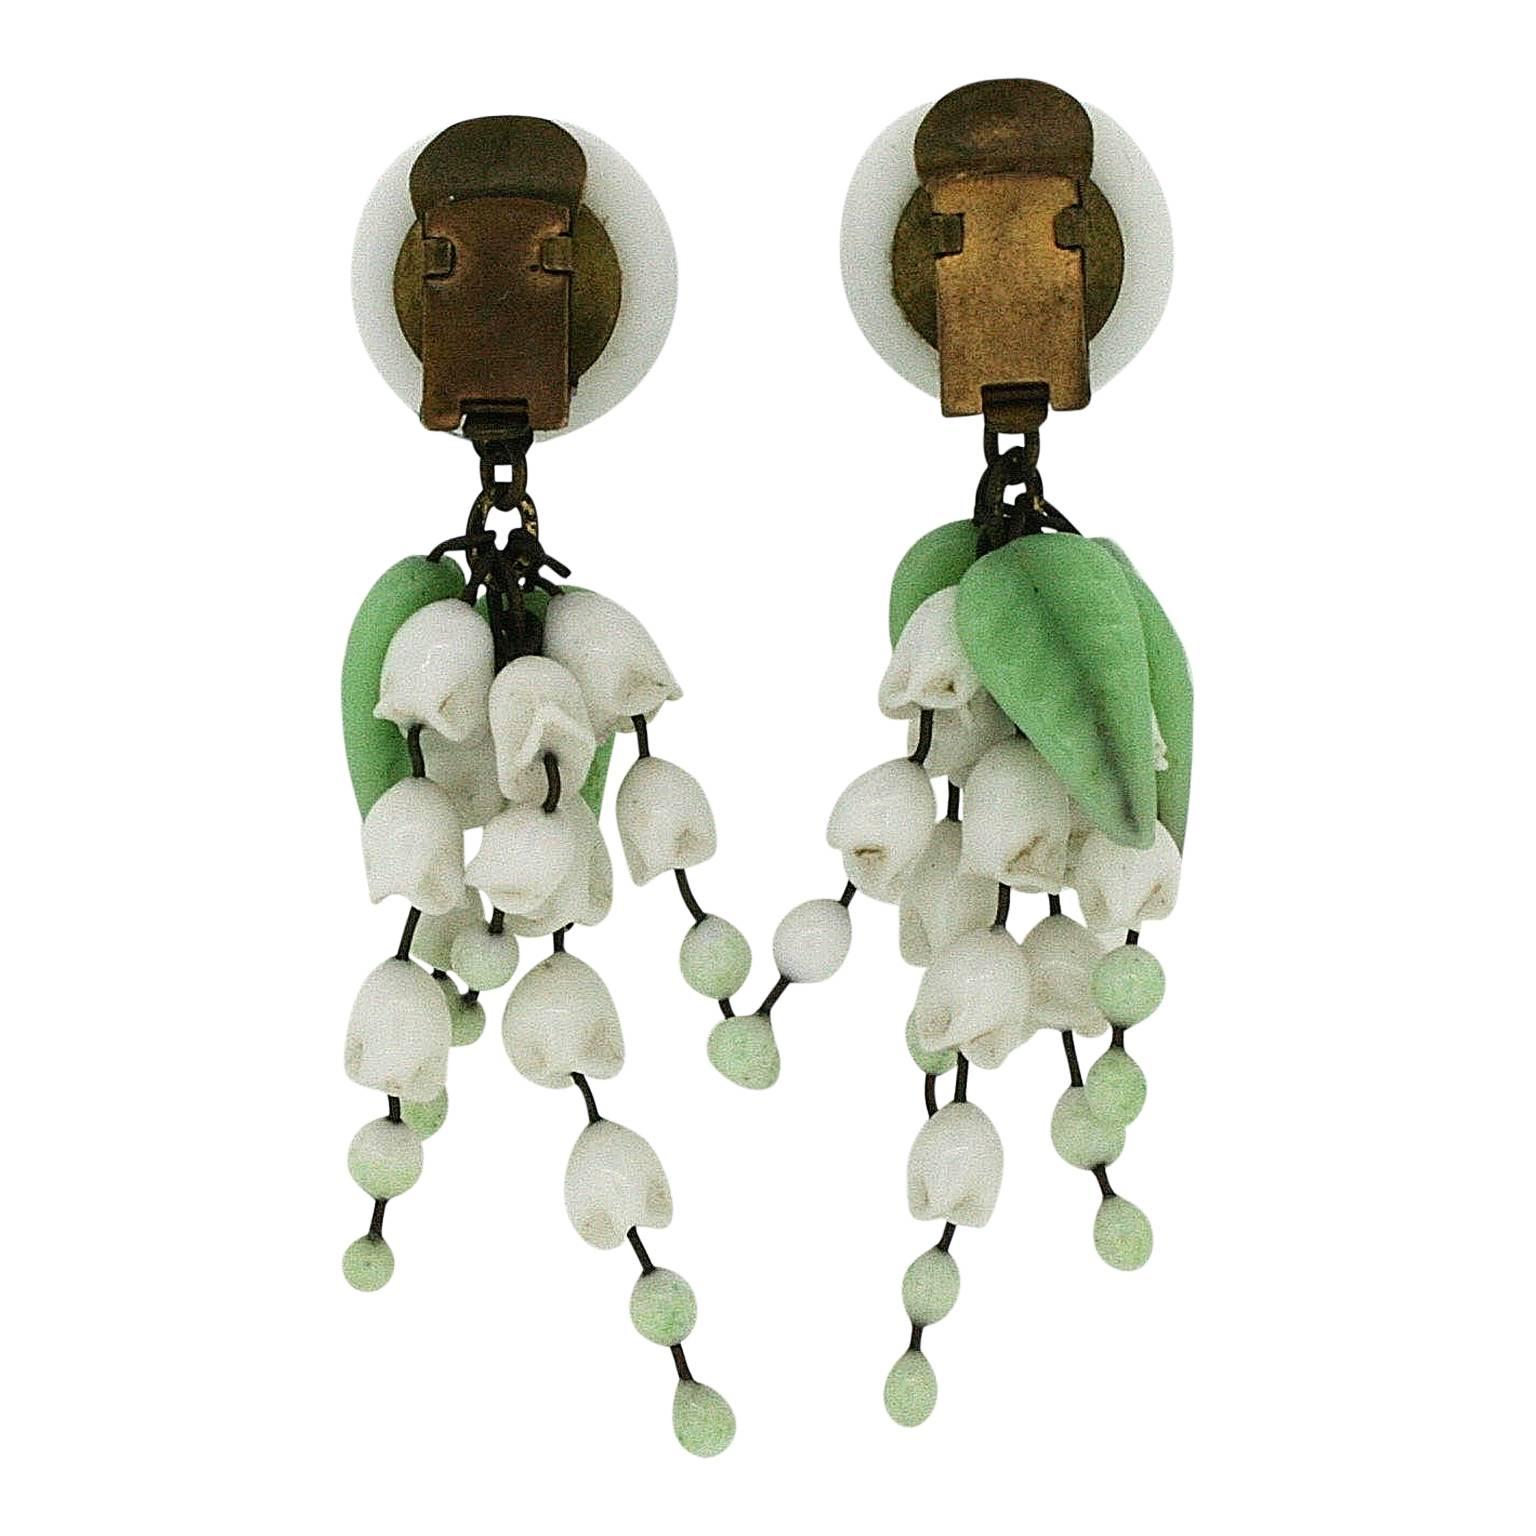 Featuring delicate glass flowers and leaves, these earrings were created in France during the 1940s.
Condition Report:
Very Good - One leaf is missing from one earring and there is some wear to the gilt metal consistent with age and use. This is